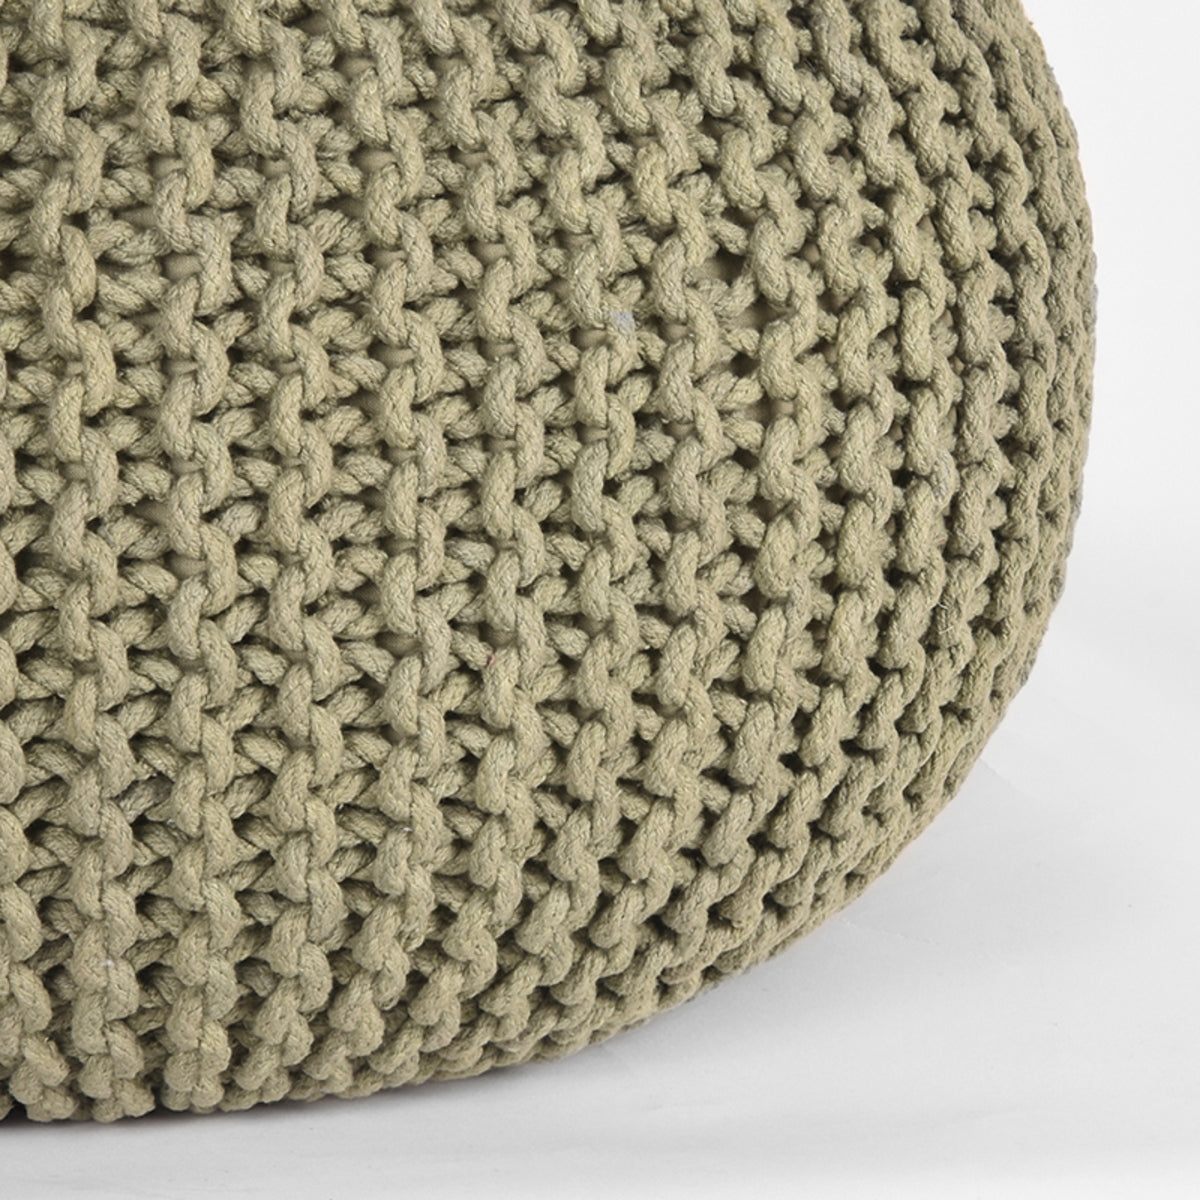 LABEL51 Pouf Knitted - Olive green - Cotton - M